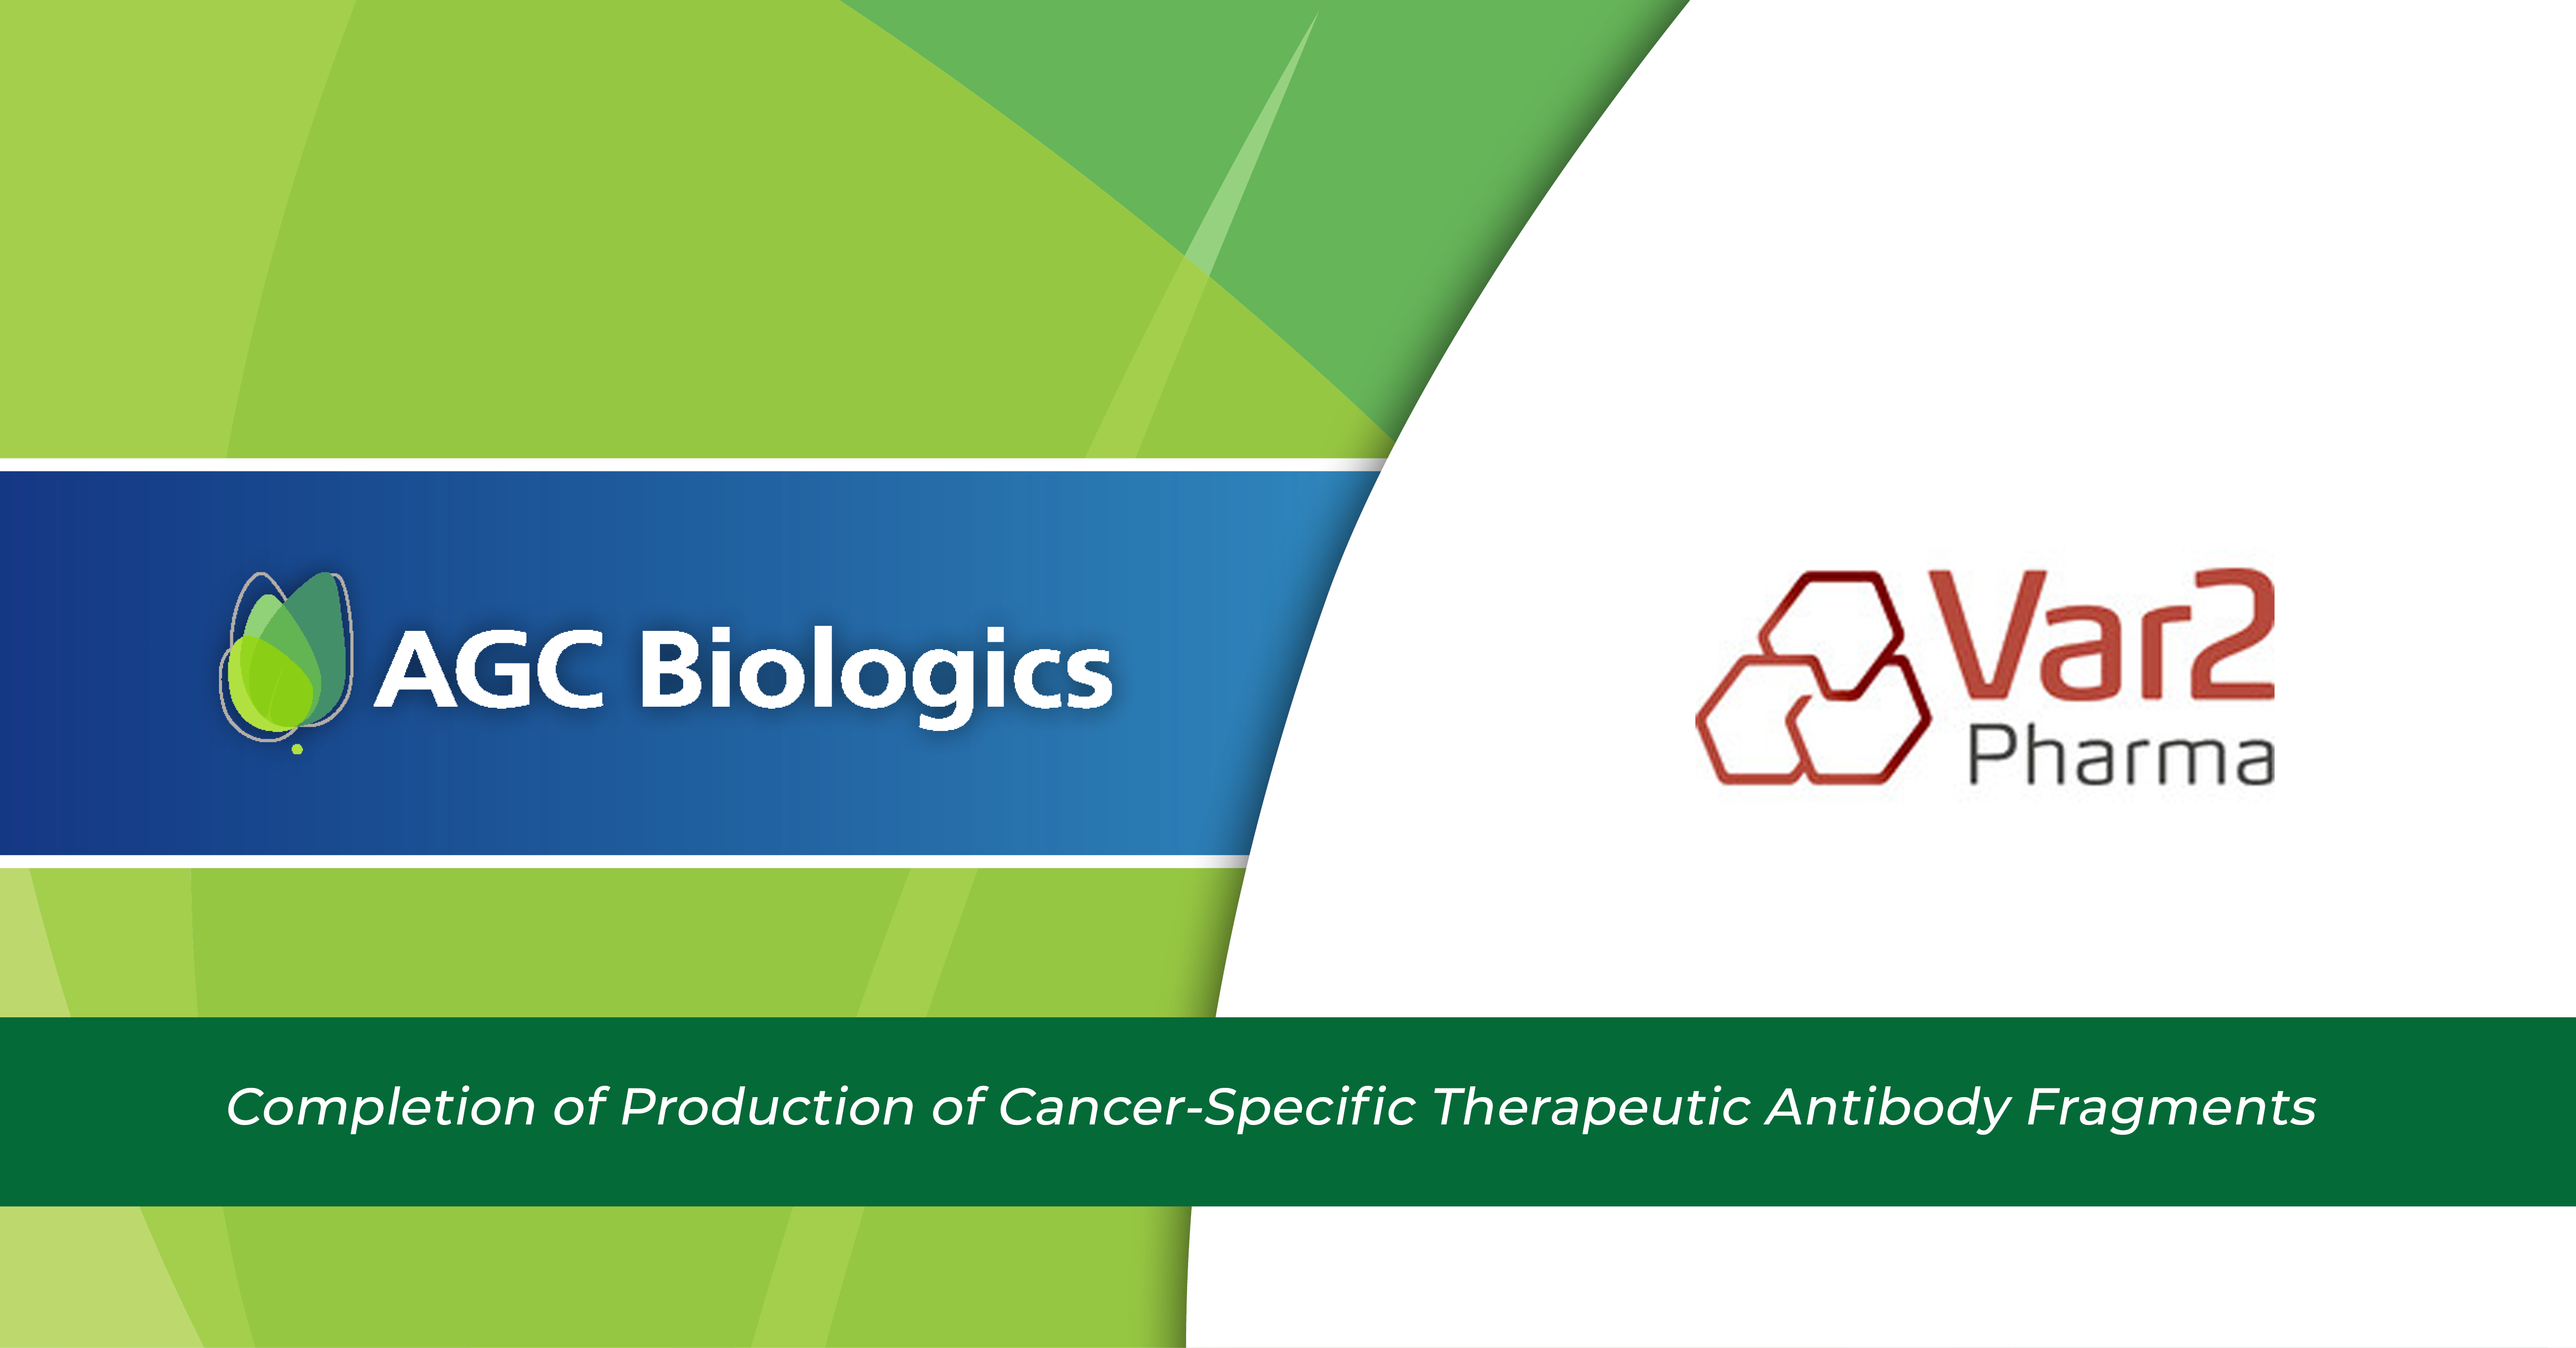 AGC Biologics Announces Successful Completion of Production of Cancer-Specific Therapeutic Antibody Fragments with Var2 Pharmaceuticals